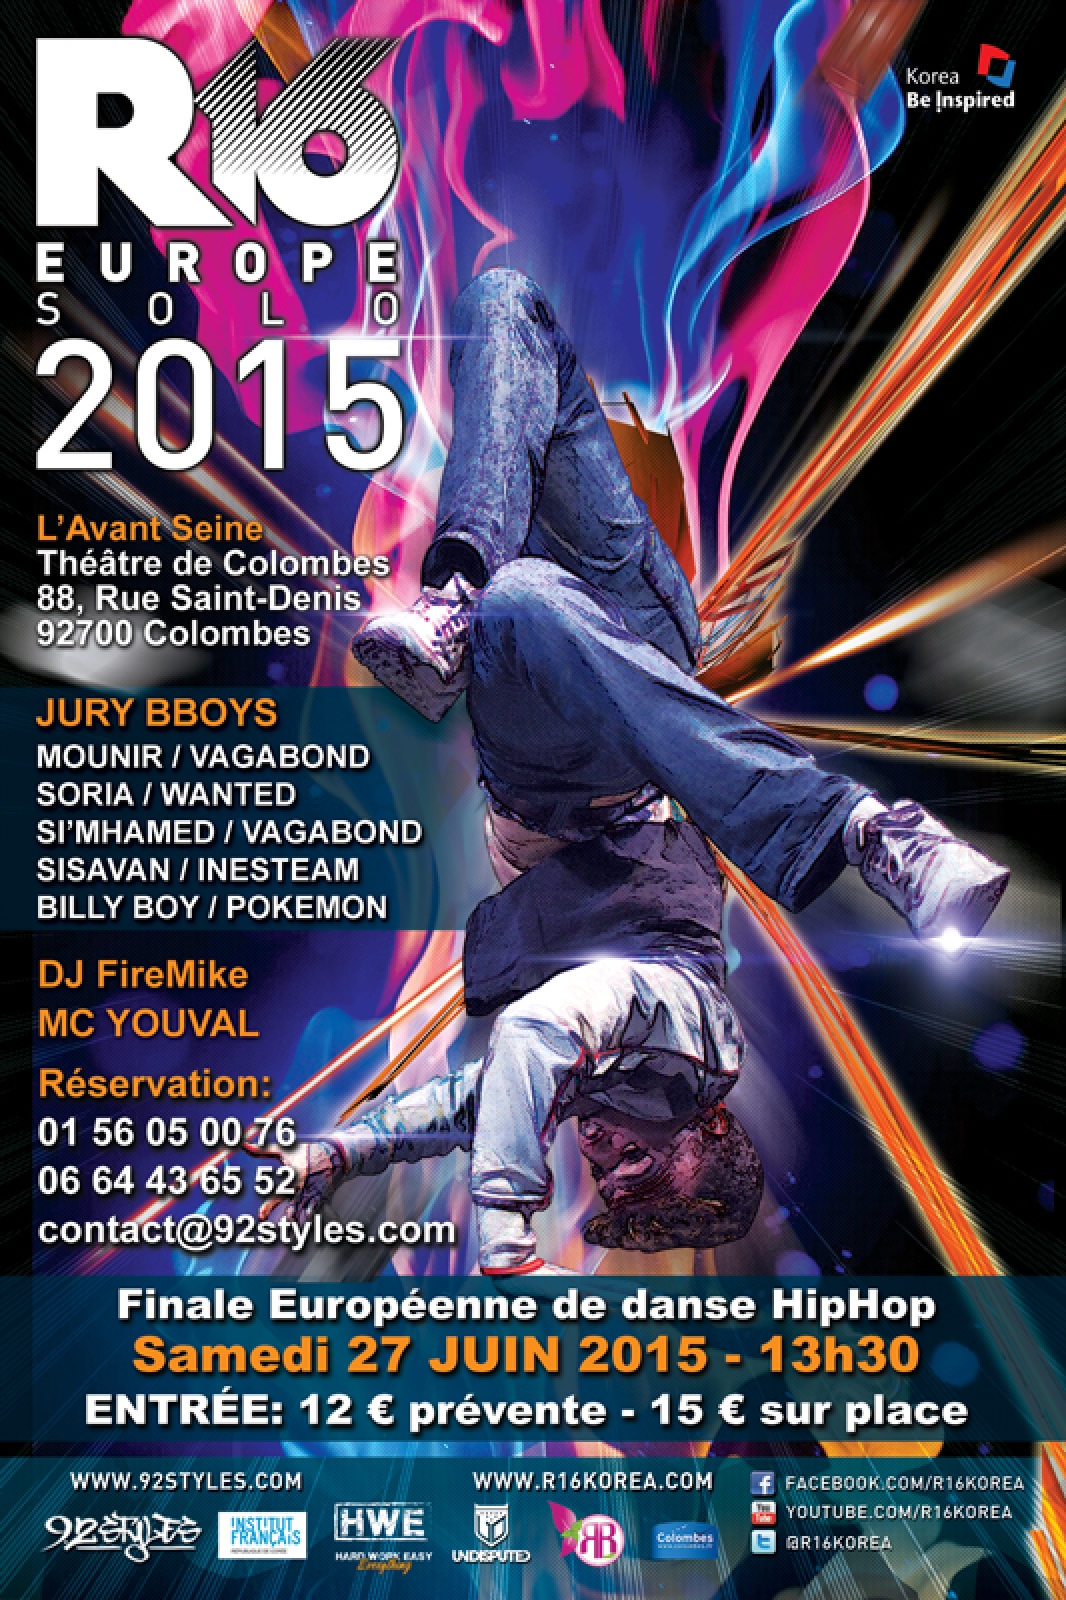 R16 Europe Solo Bboy & R16 France Funkystyles poster